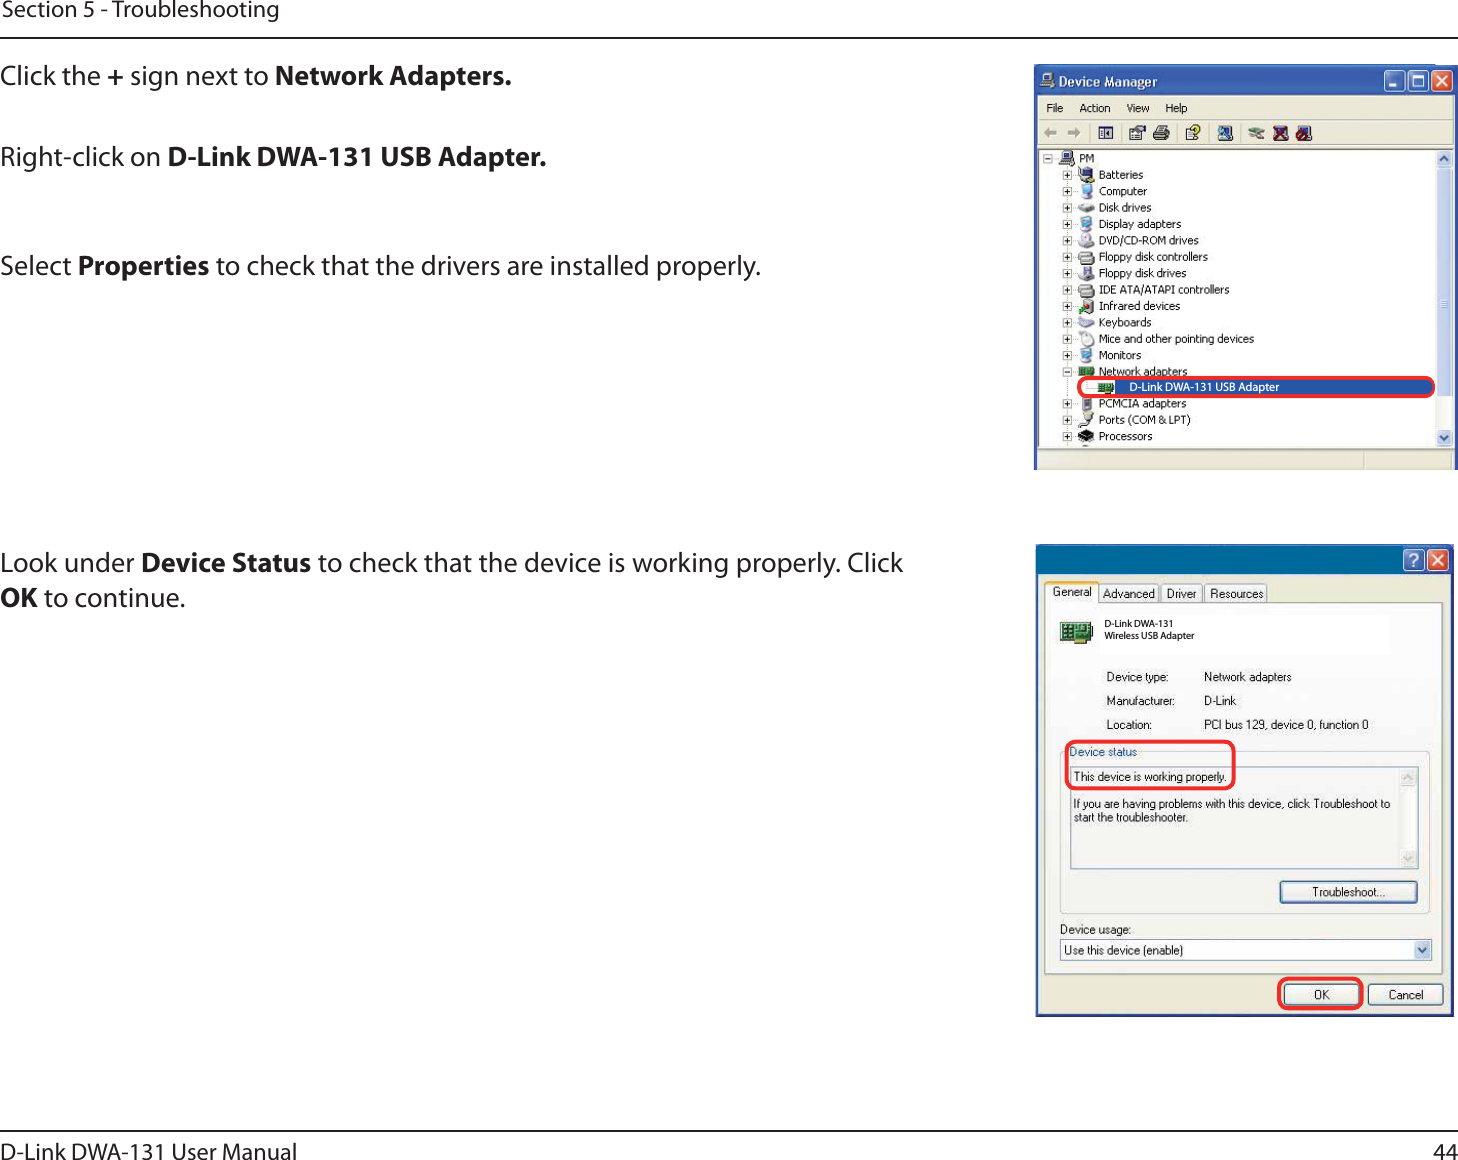 44D-Link DWA-131 User ManualSection 5 - TroubleshootingClick the + sign next to Network Adapters.Right-click on D-Link DWA-131 USB Adapter.Select Properties to check that the drivers are installed properly.Look under Device Status to check that the device is working properly. Click OK to continue.D-Link DWA-131 USB AdapterD-Link DWA-131 Wireless USB Adapter